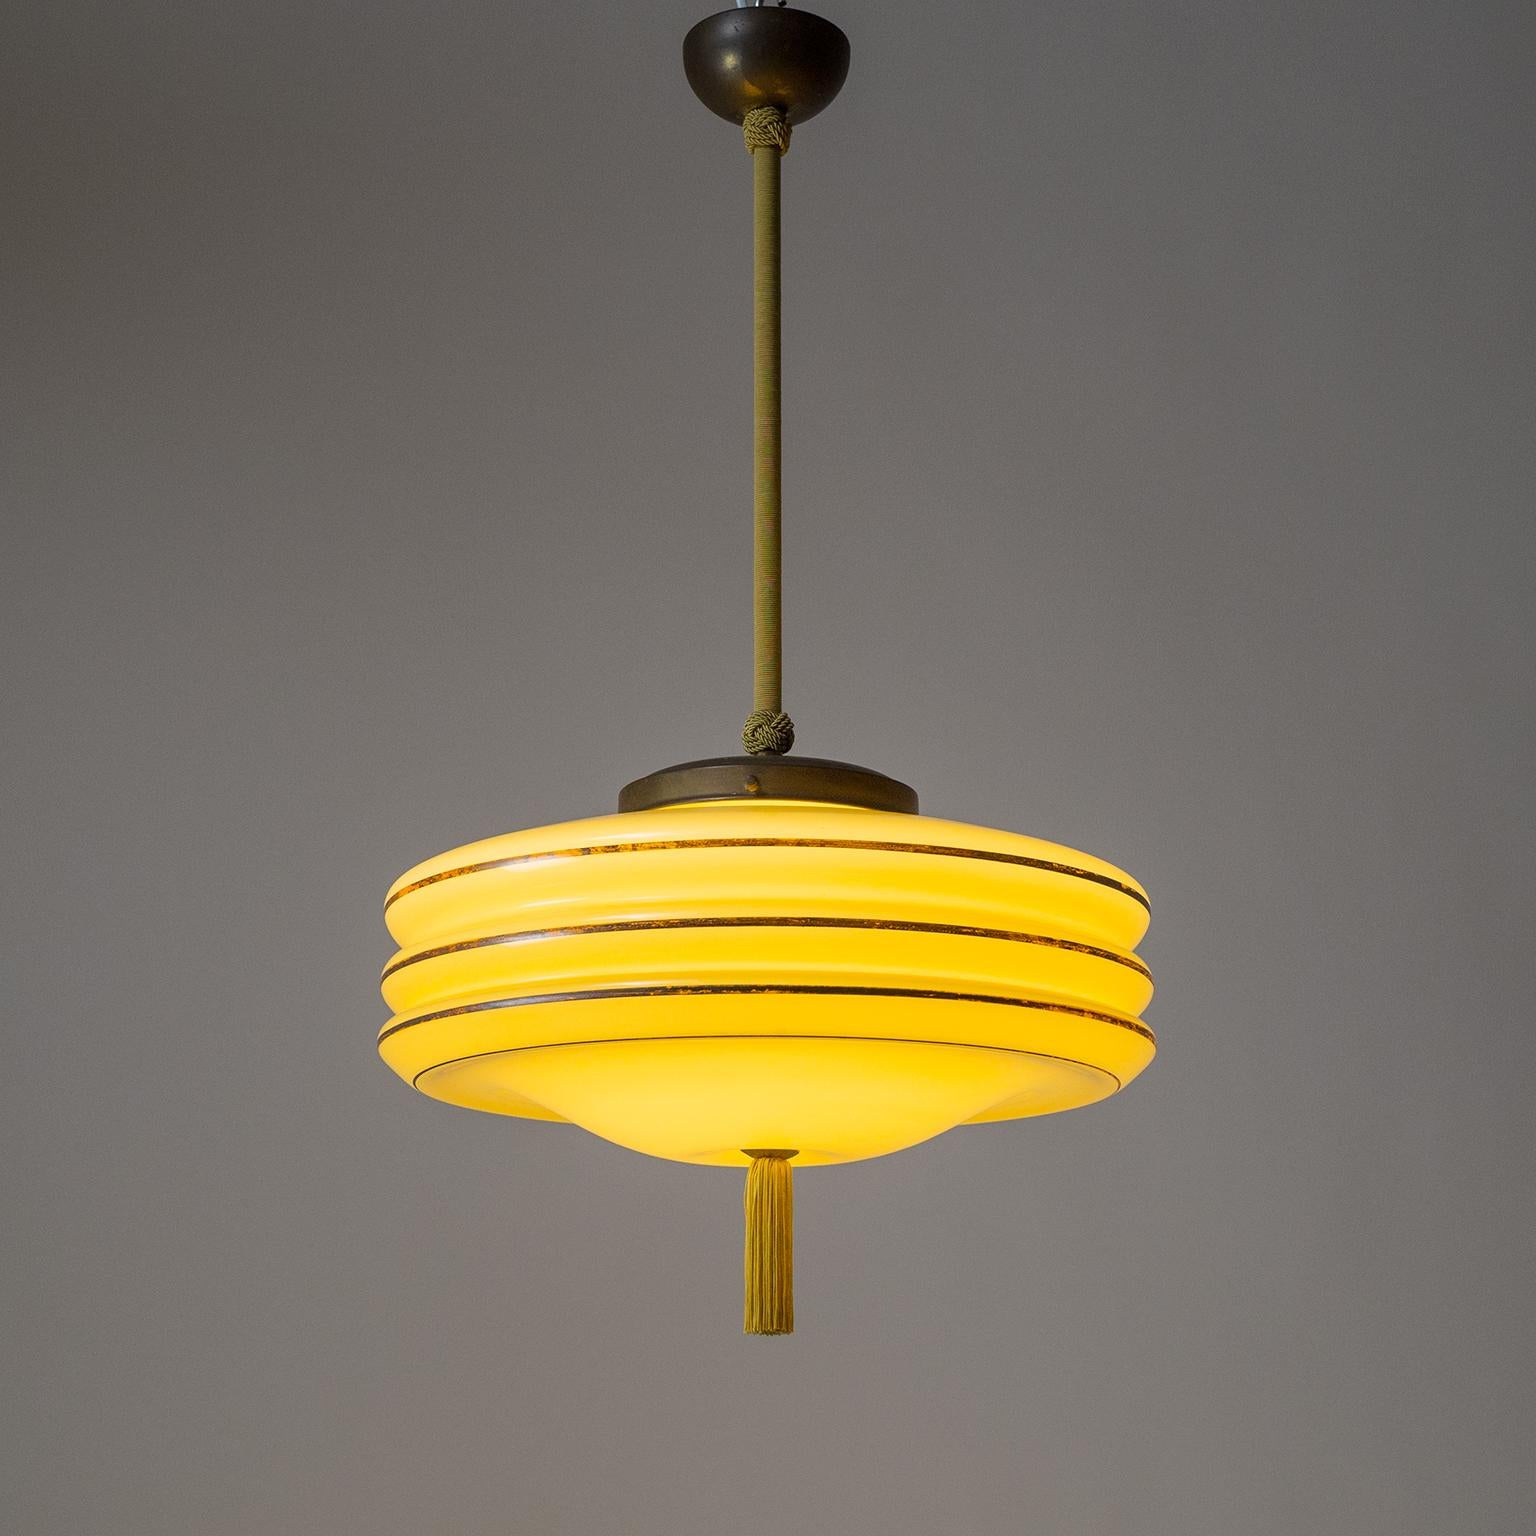 Rare Art Deco pendant with a large pastel amber colored glass diffuser, circa 1930. The glass body has a white casing inside and a very unusual tripple saturn ring shape which is emphasized by a silver paint line on each 'ring' which has darkened